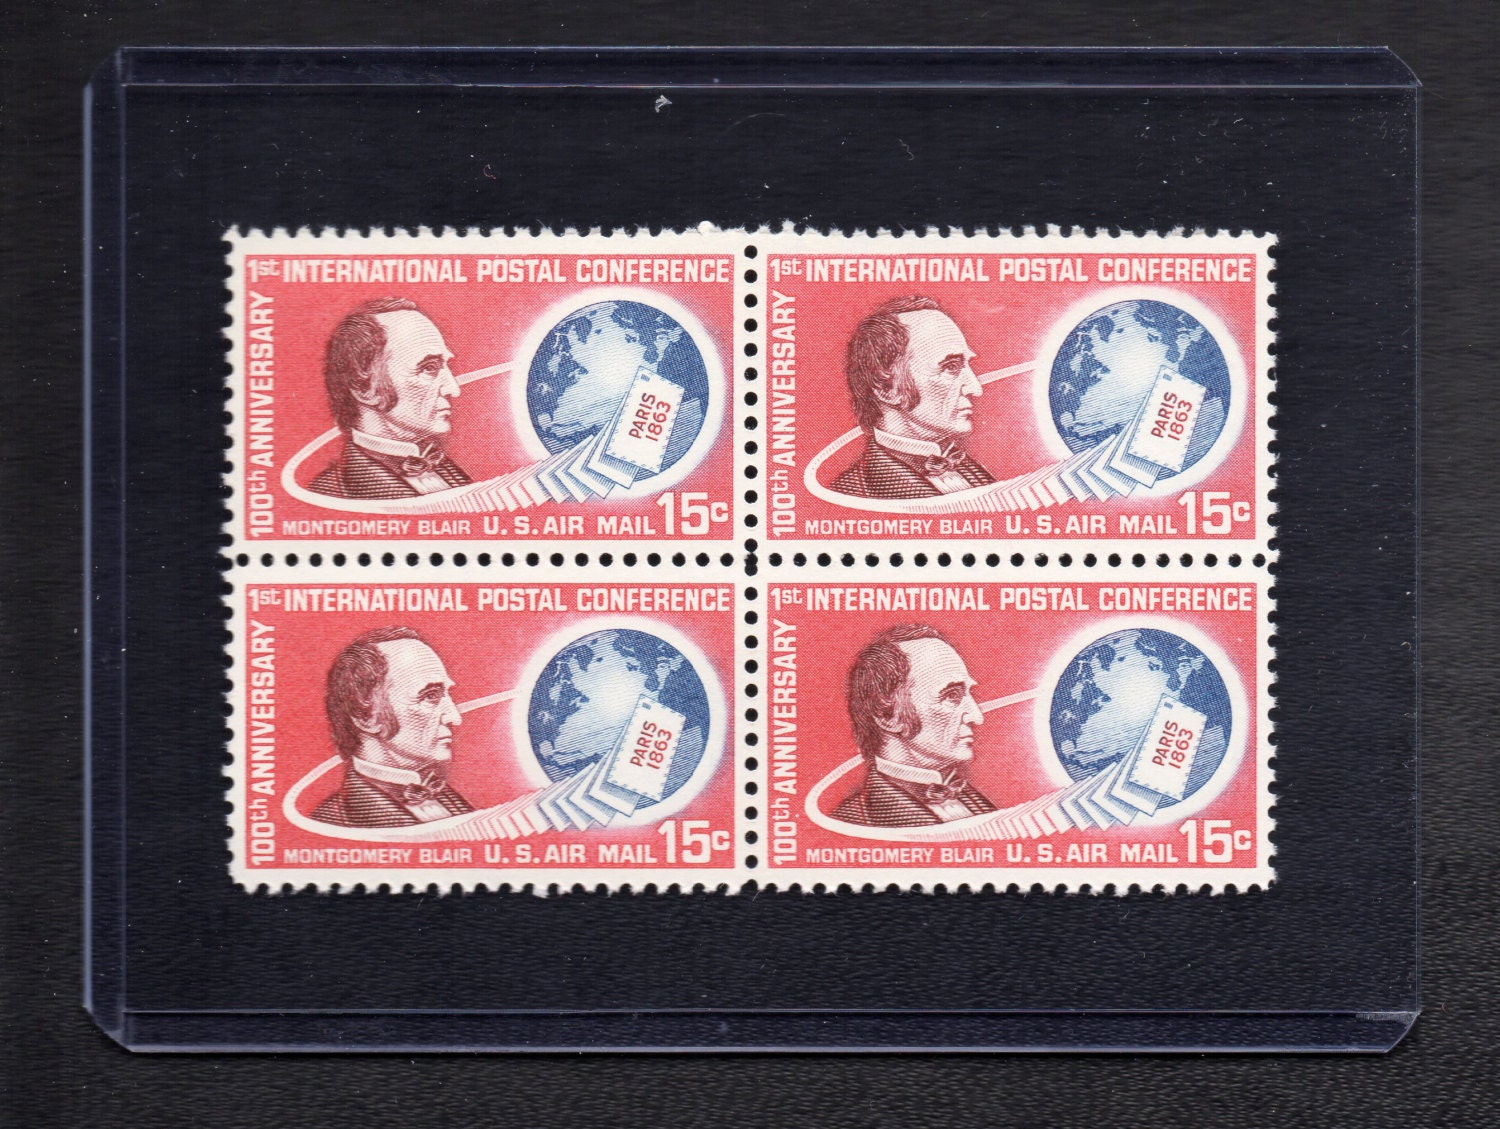 11 cent us airmail stamp